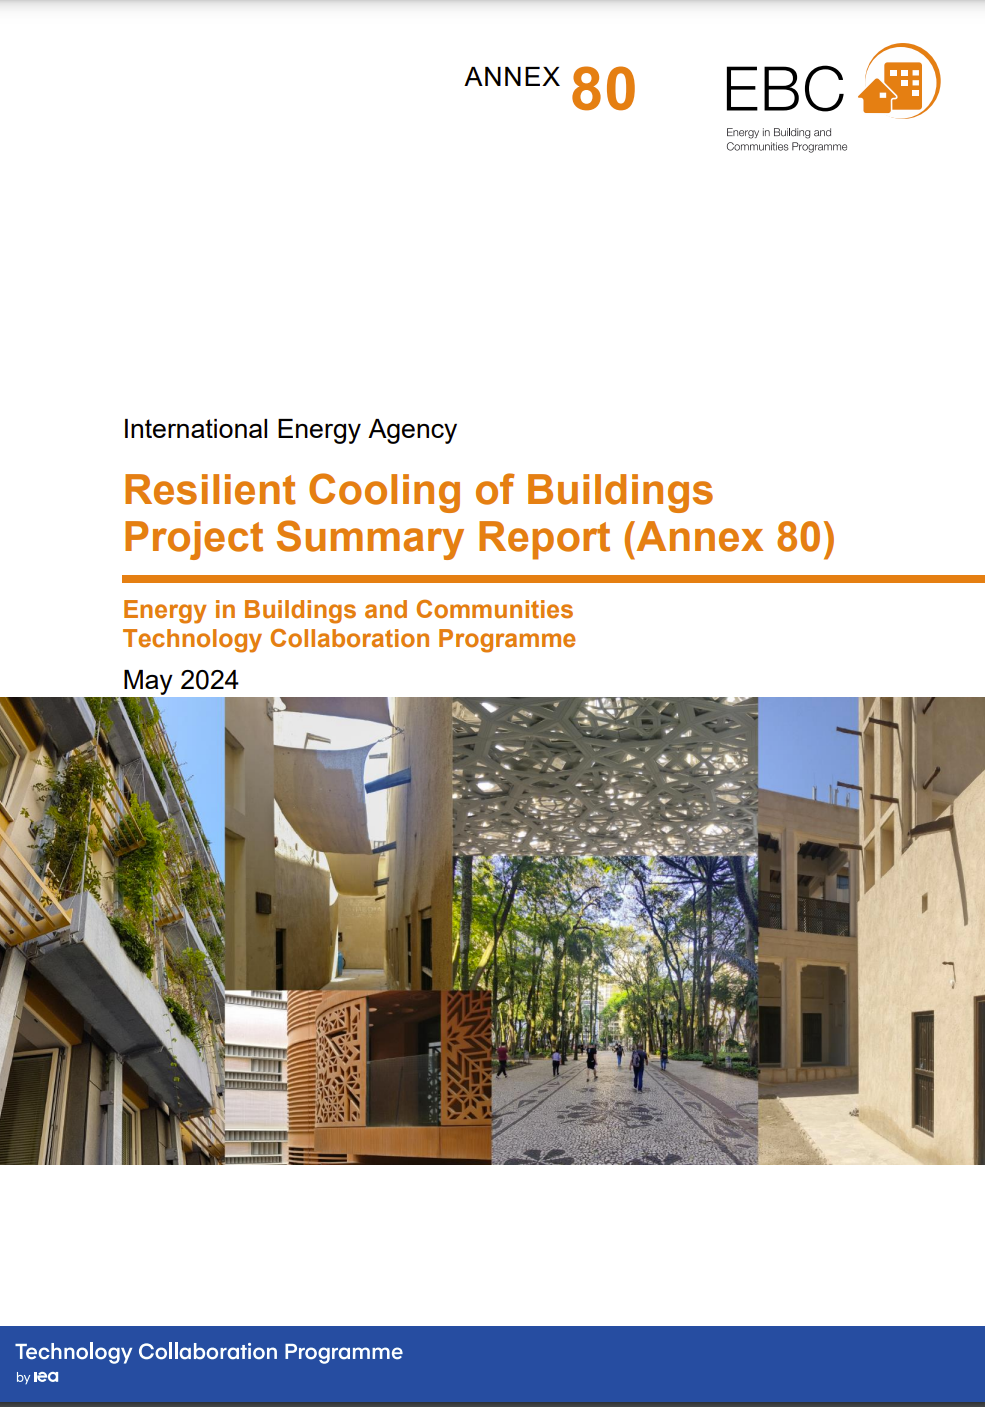 International Energy Agency Resilient Cooling of Buildings – Project Summary Report (Annex 80)